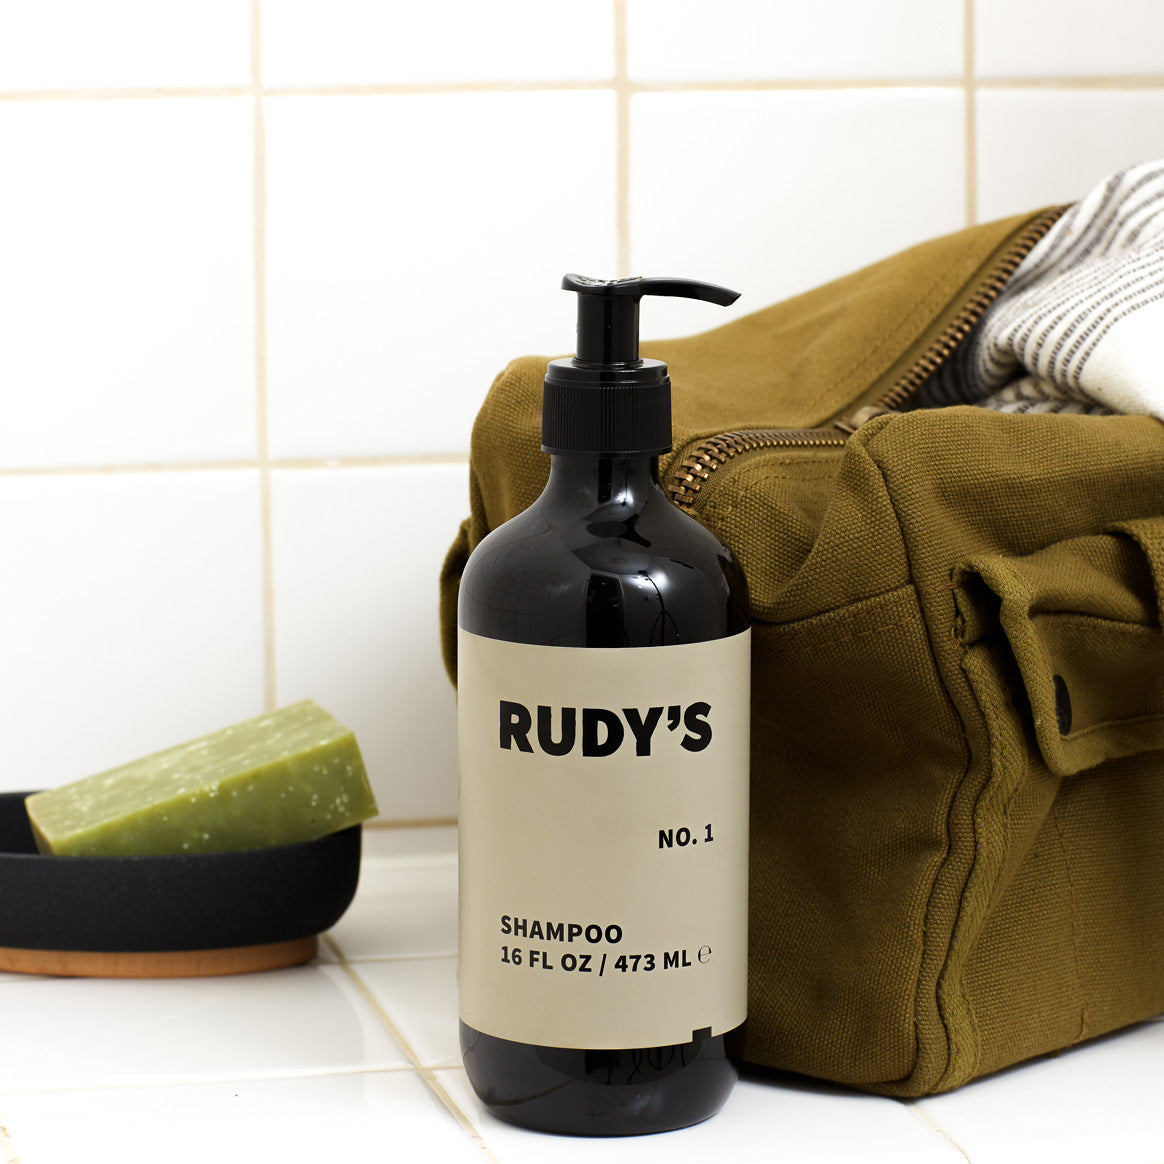 Rudy's Barbershop No. 1 Shampoo in your shower